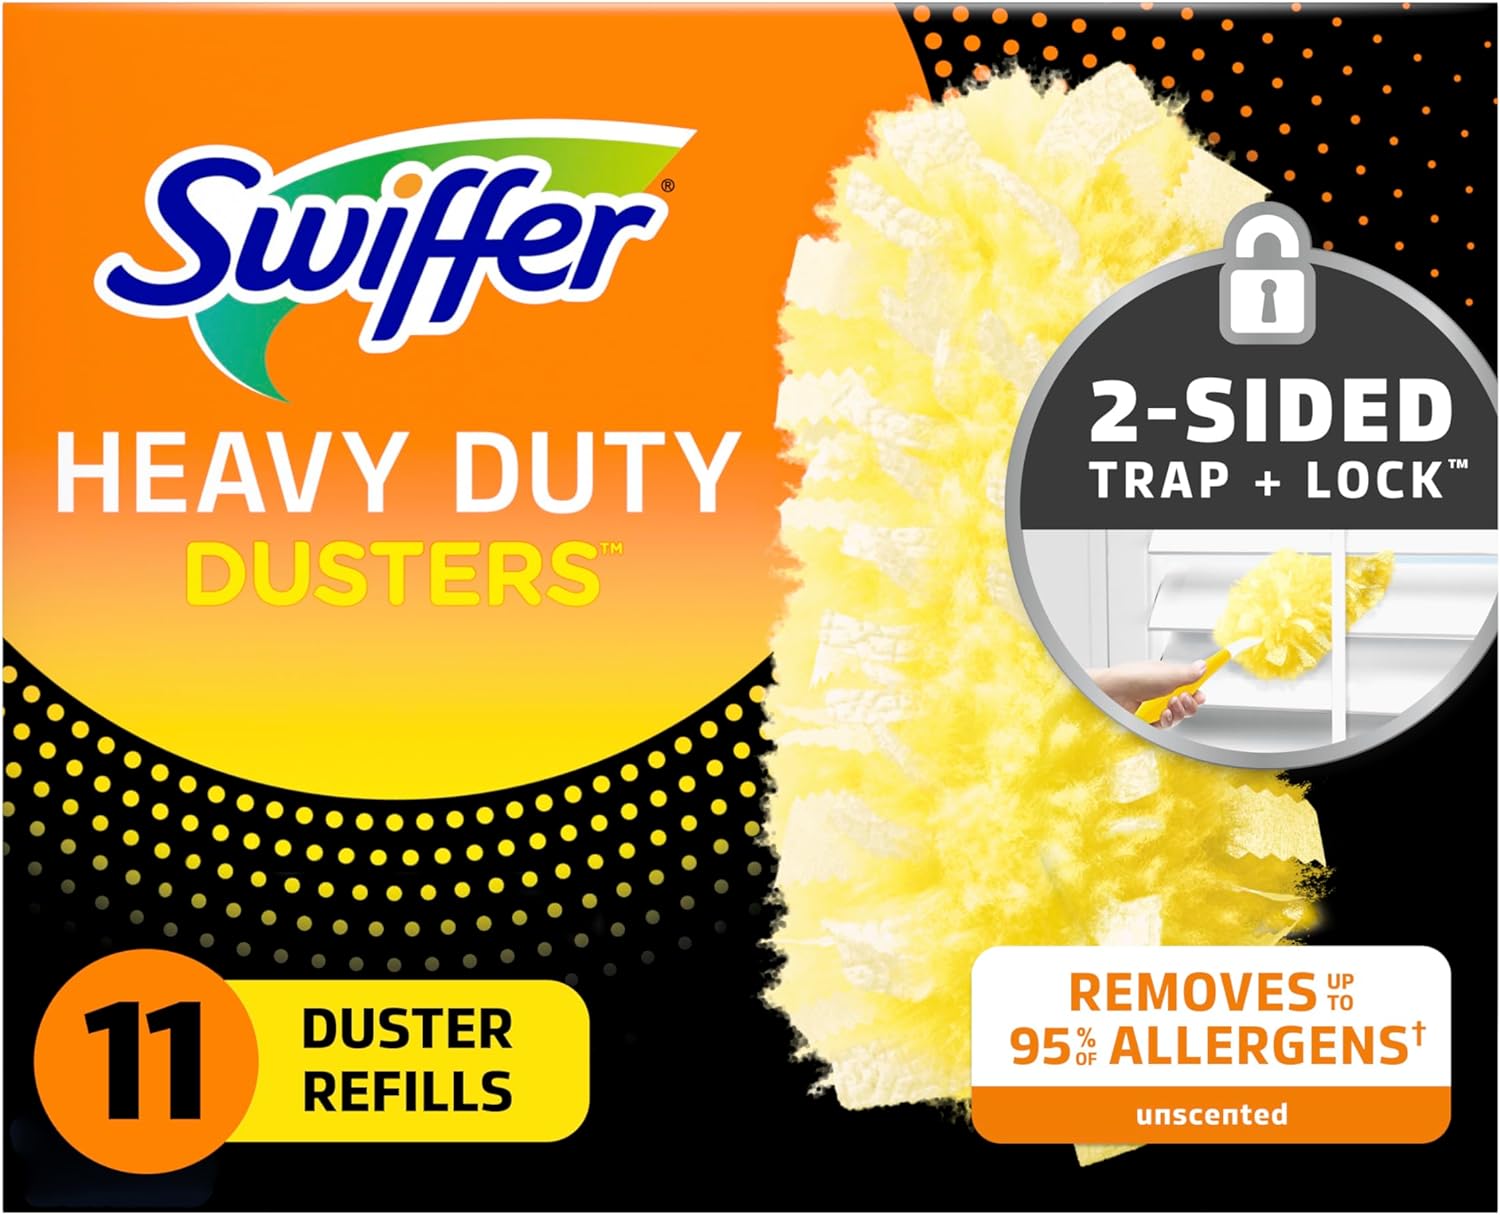 This is one of many Swiffer products in my house. Great for cleaning ceiling fans.